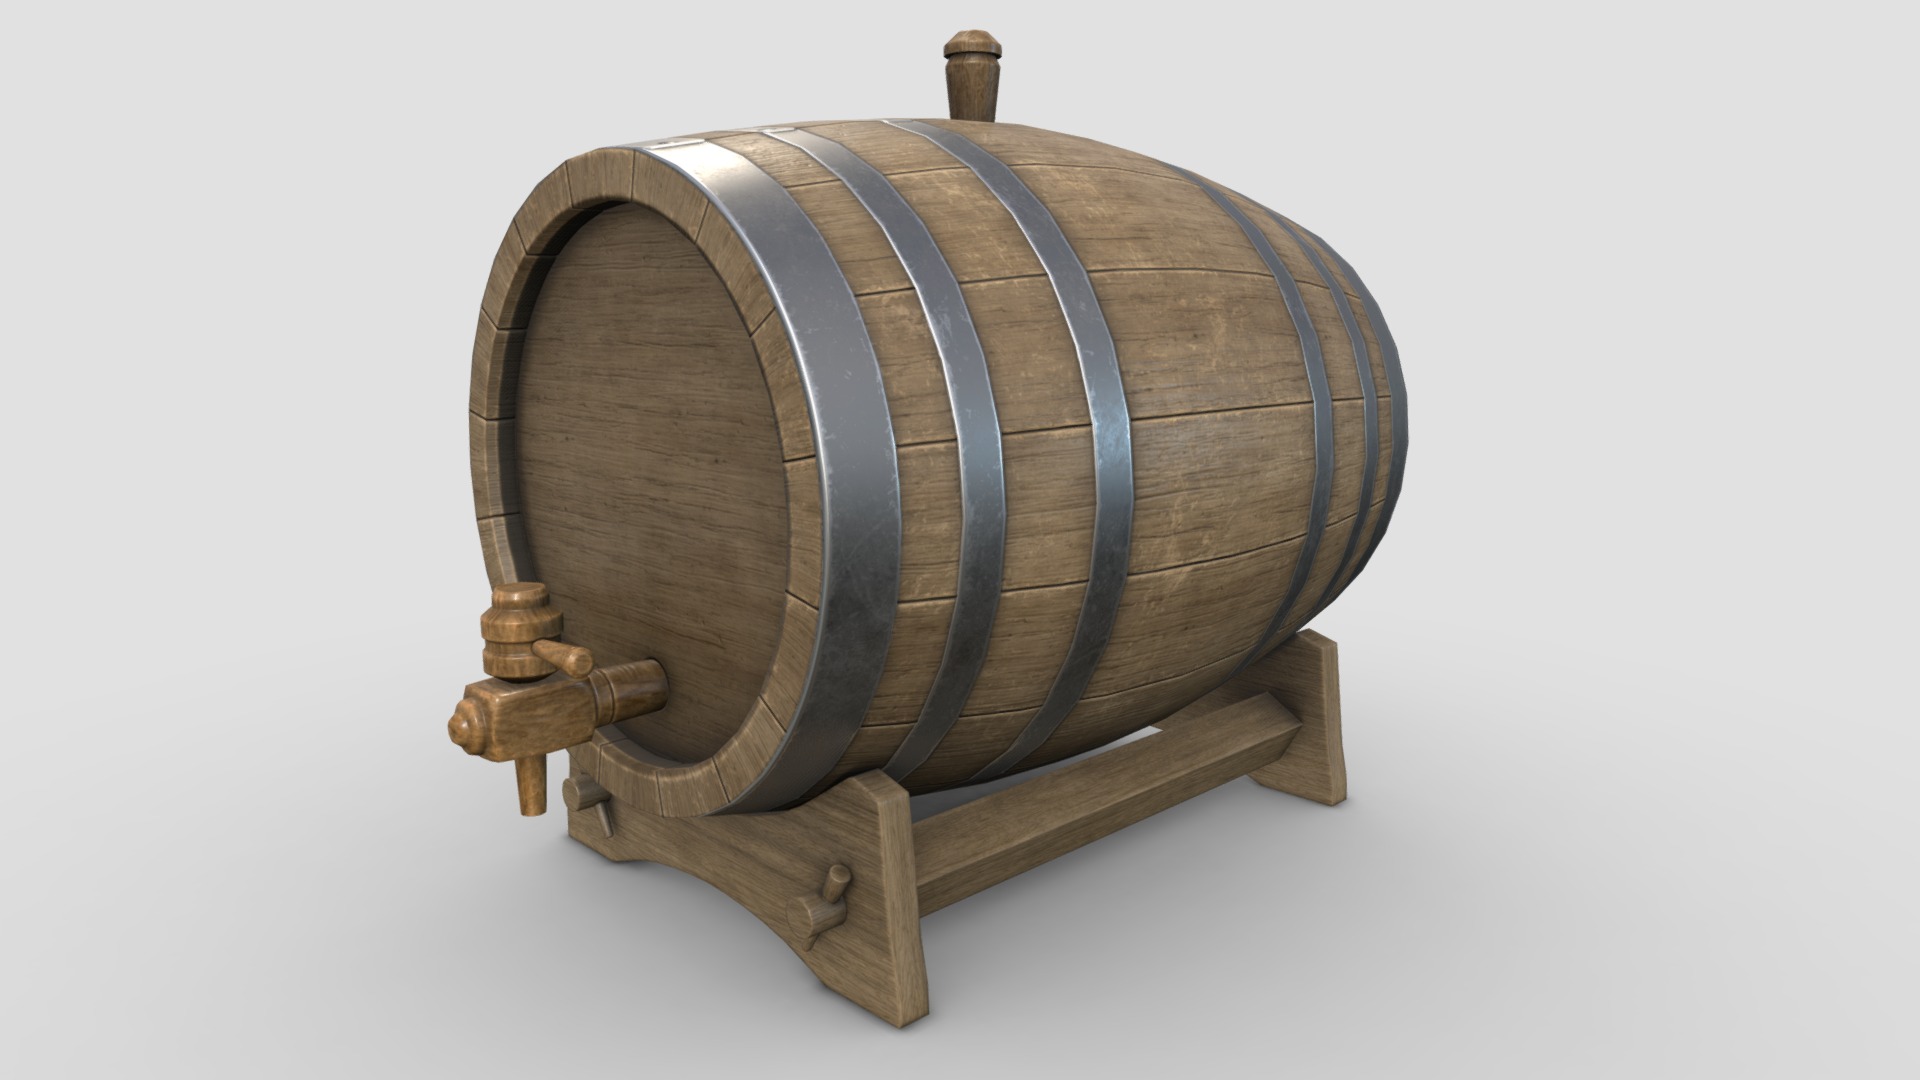 3D model Oak Barrel - This is a 3D model of the Oak Barrel. The 3D model is about a wooden barrel on a wooden stand.